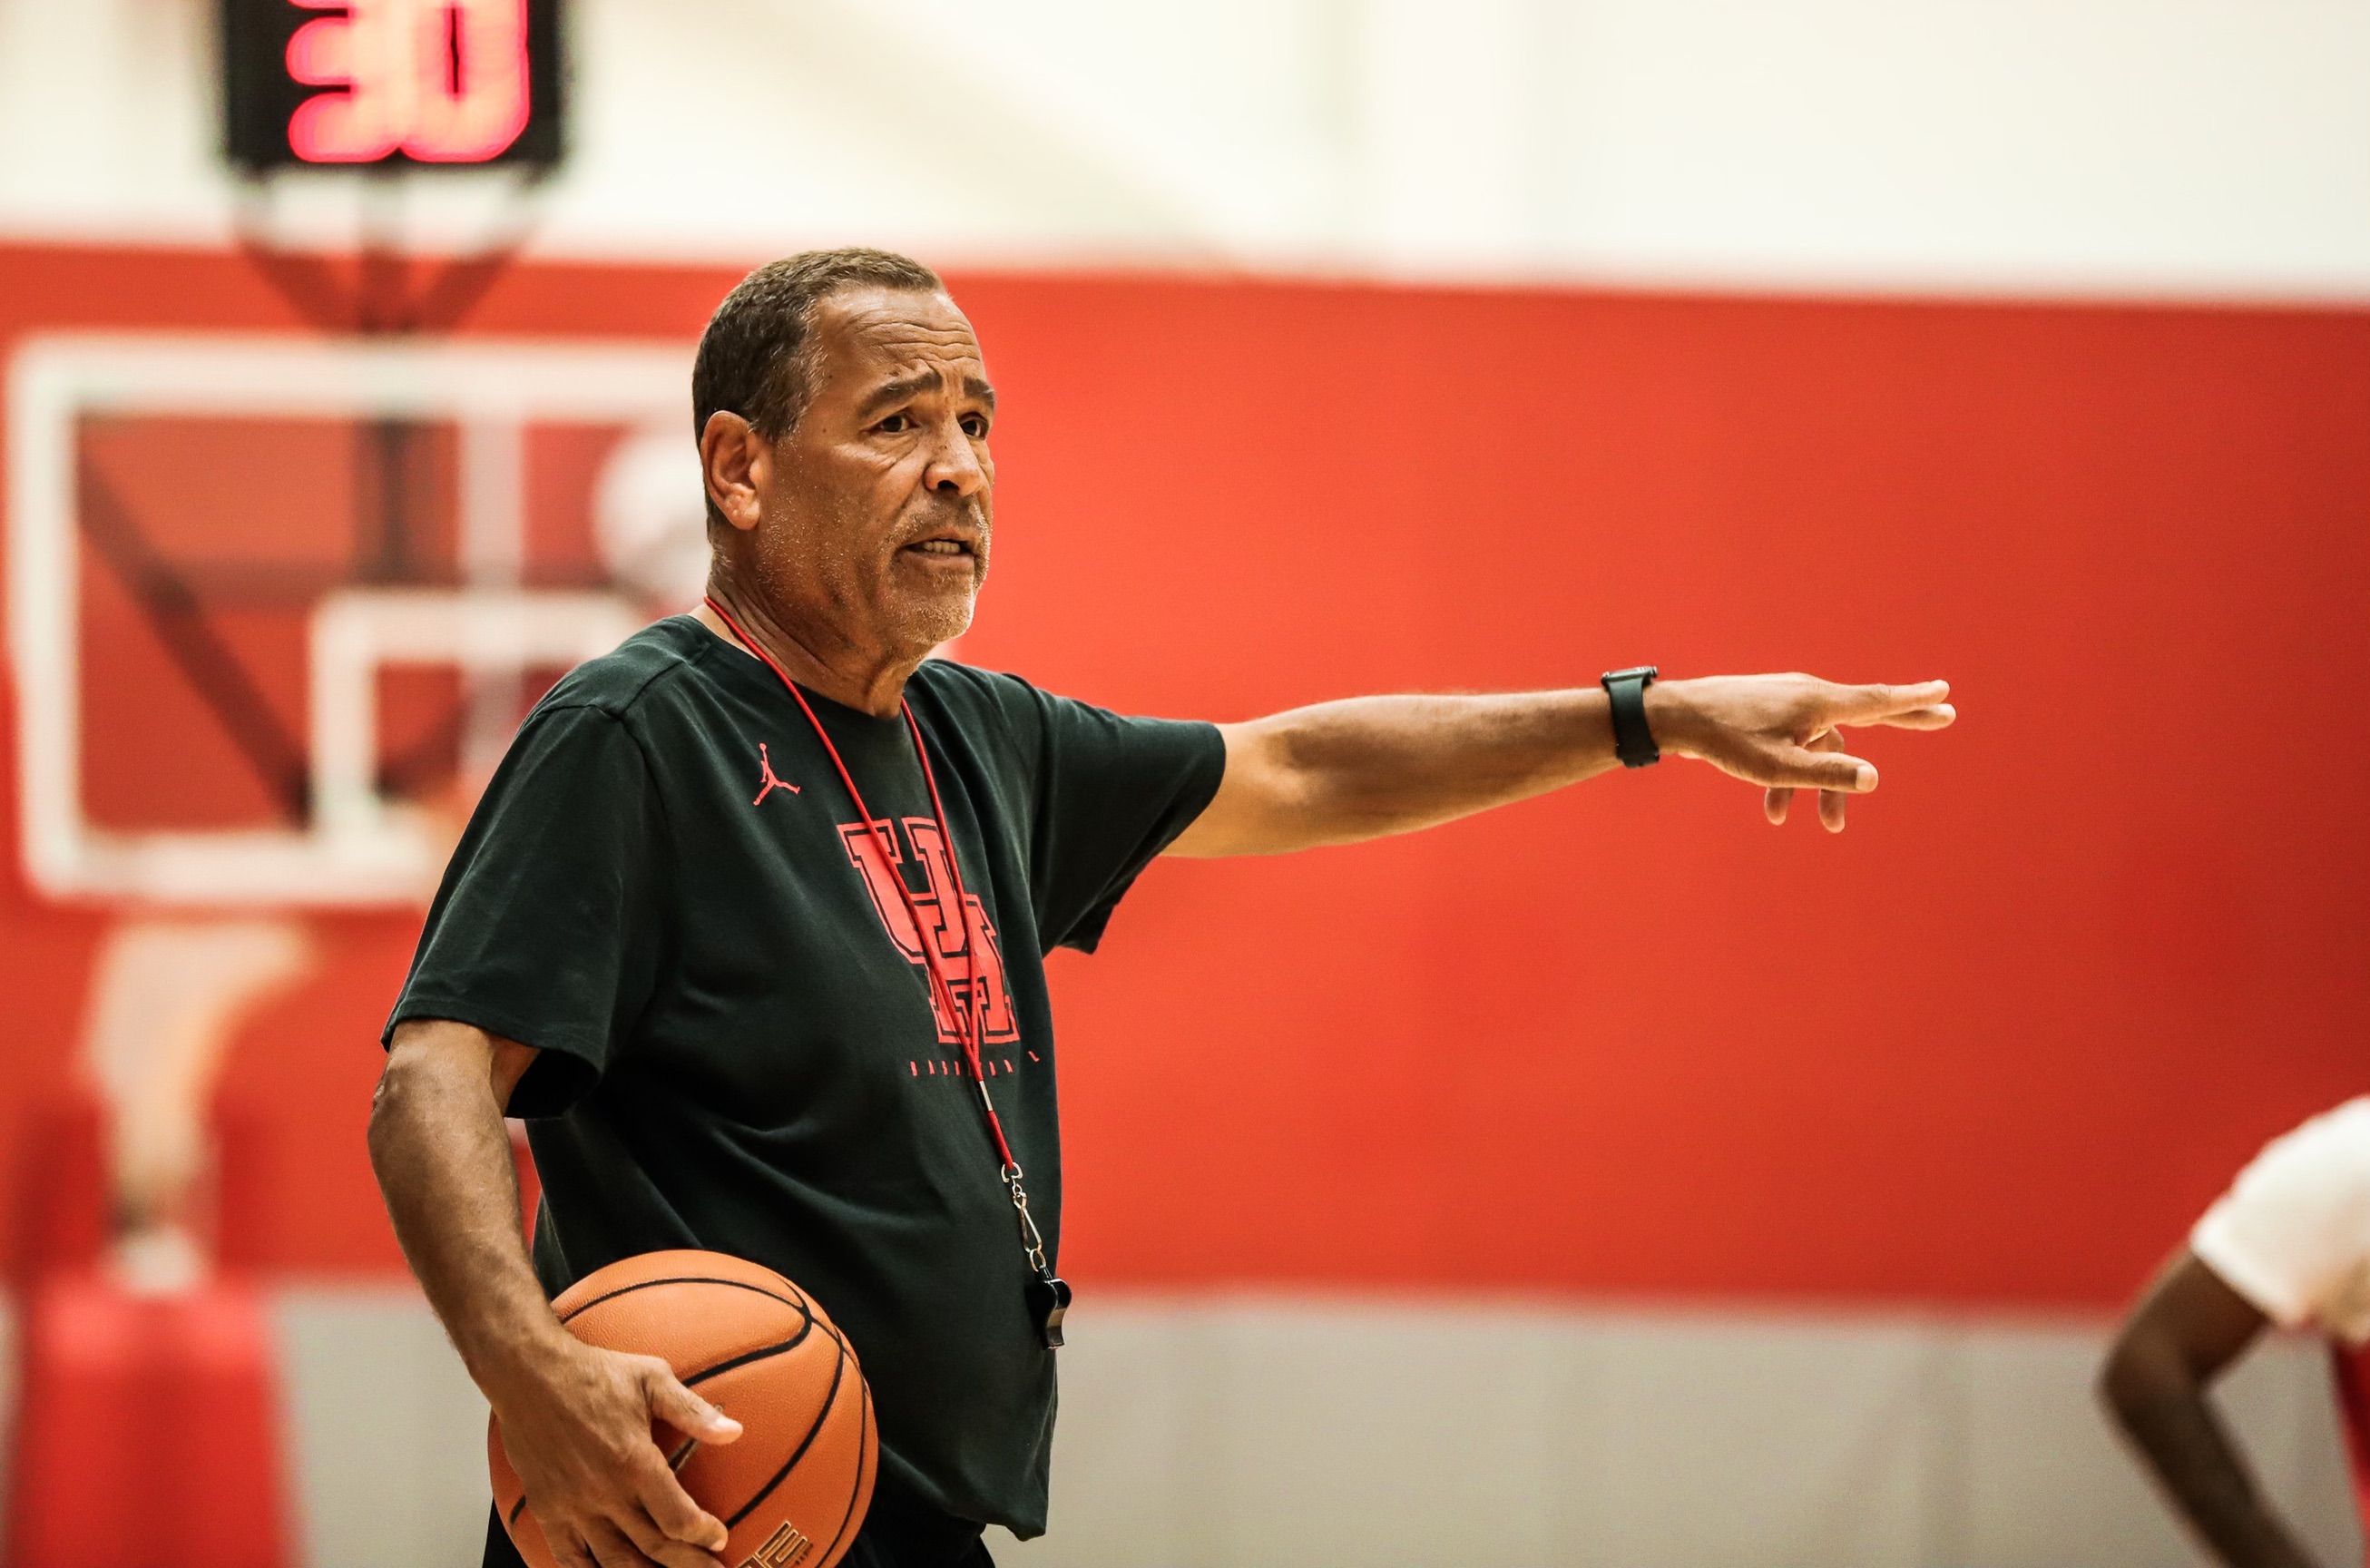 UH men's basketball head coach Kelvin Sampson was in full teaching mode during the Cougars' first practice of the 2022-23 season on Tuesday afternoon. | Sean Thomas/The Cougar